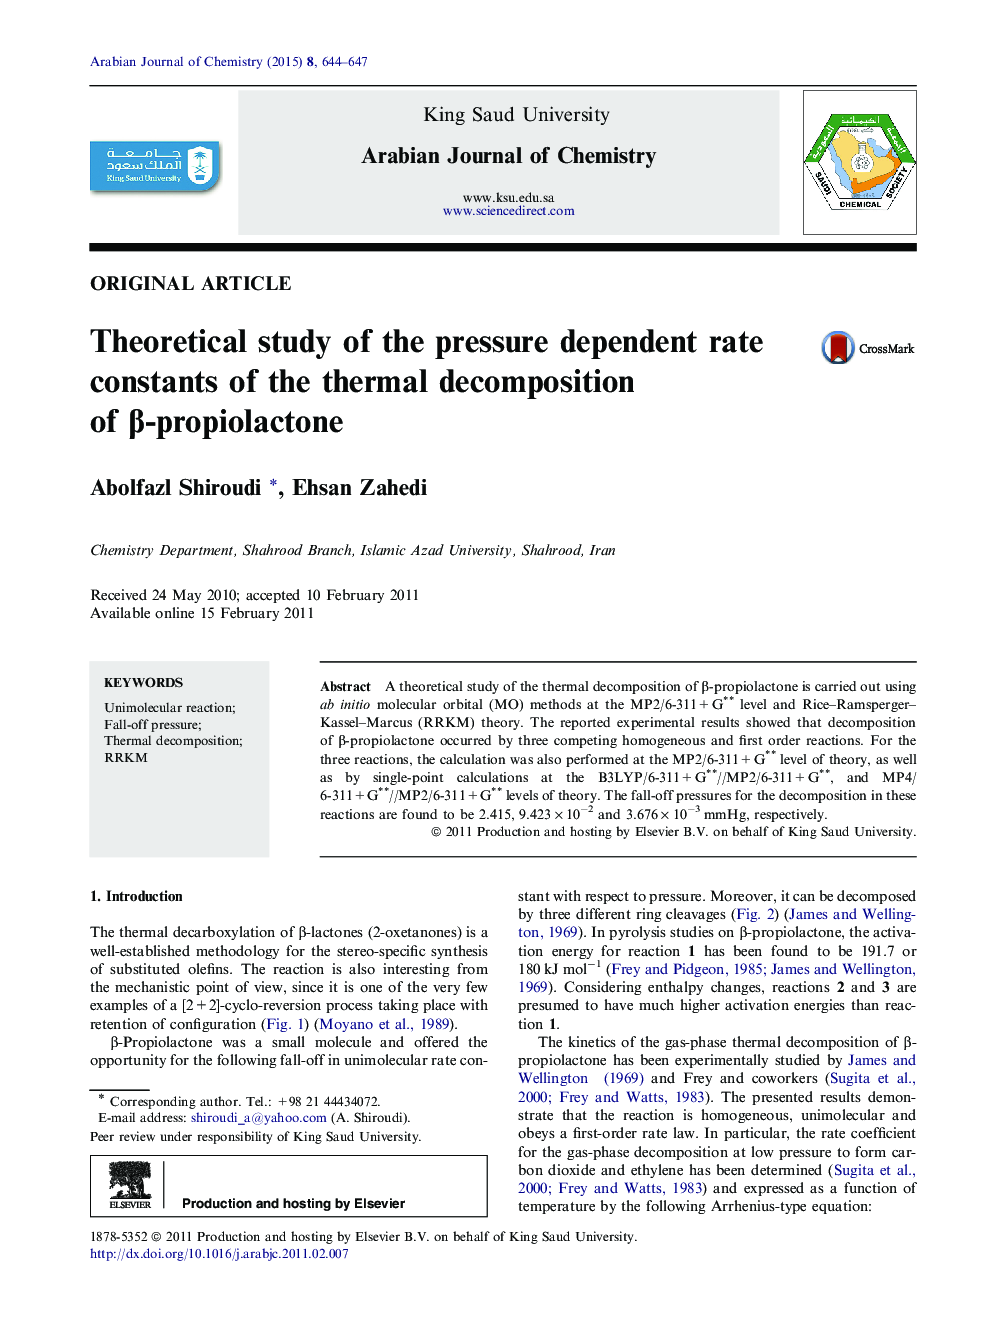 Theoretical study of the pressure dependent rate constants of the thermal decomposition of β-propiolactone 